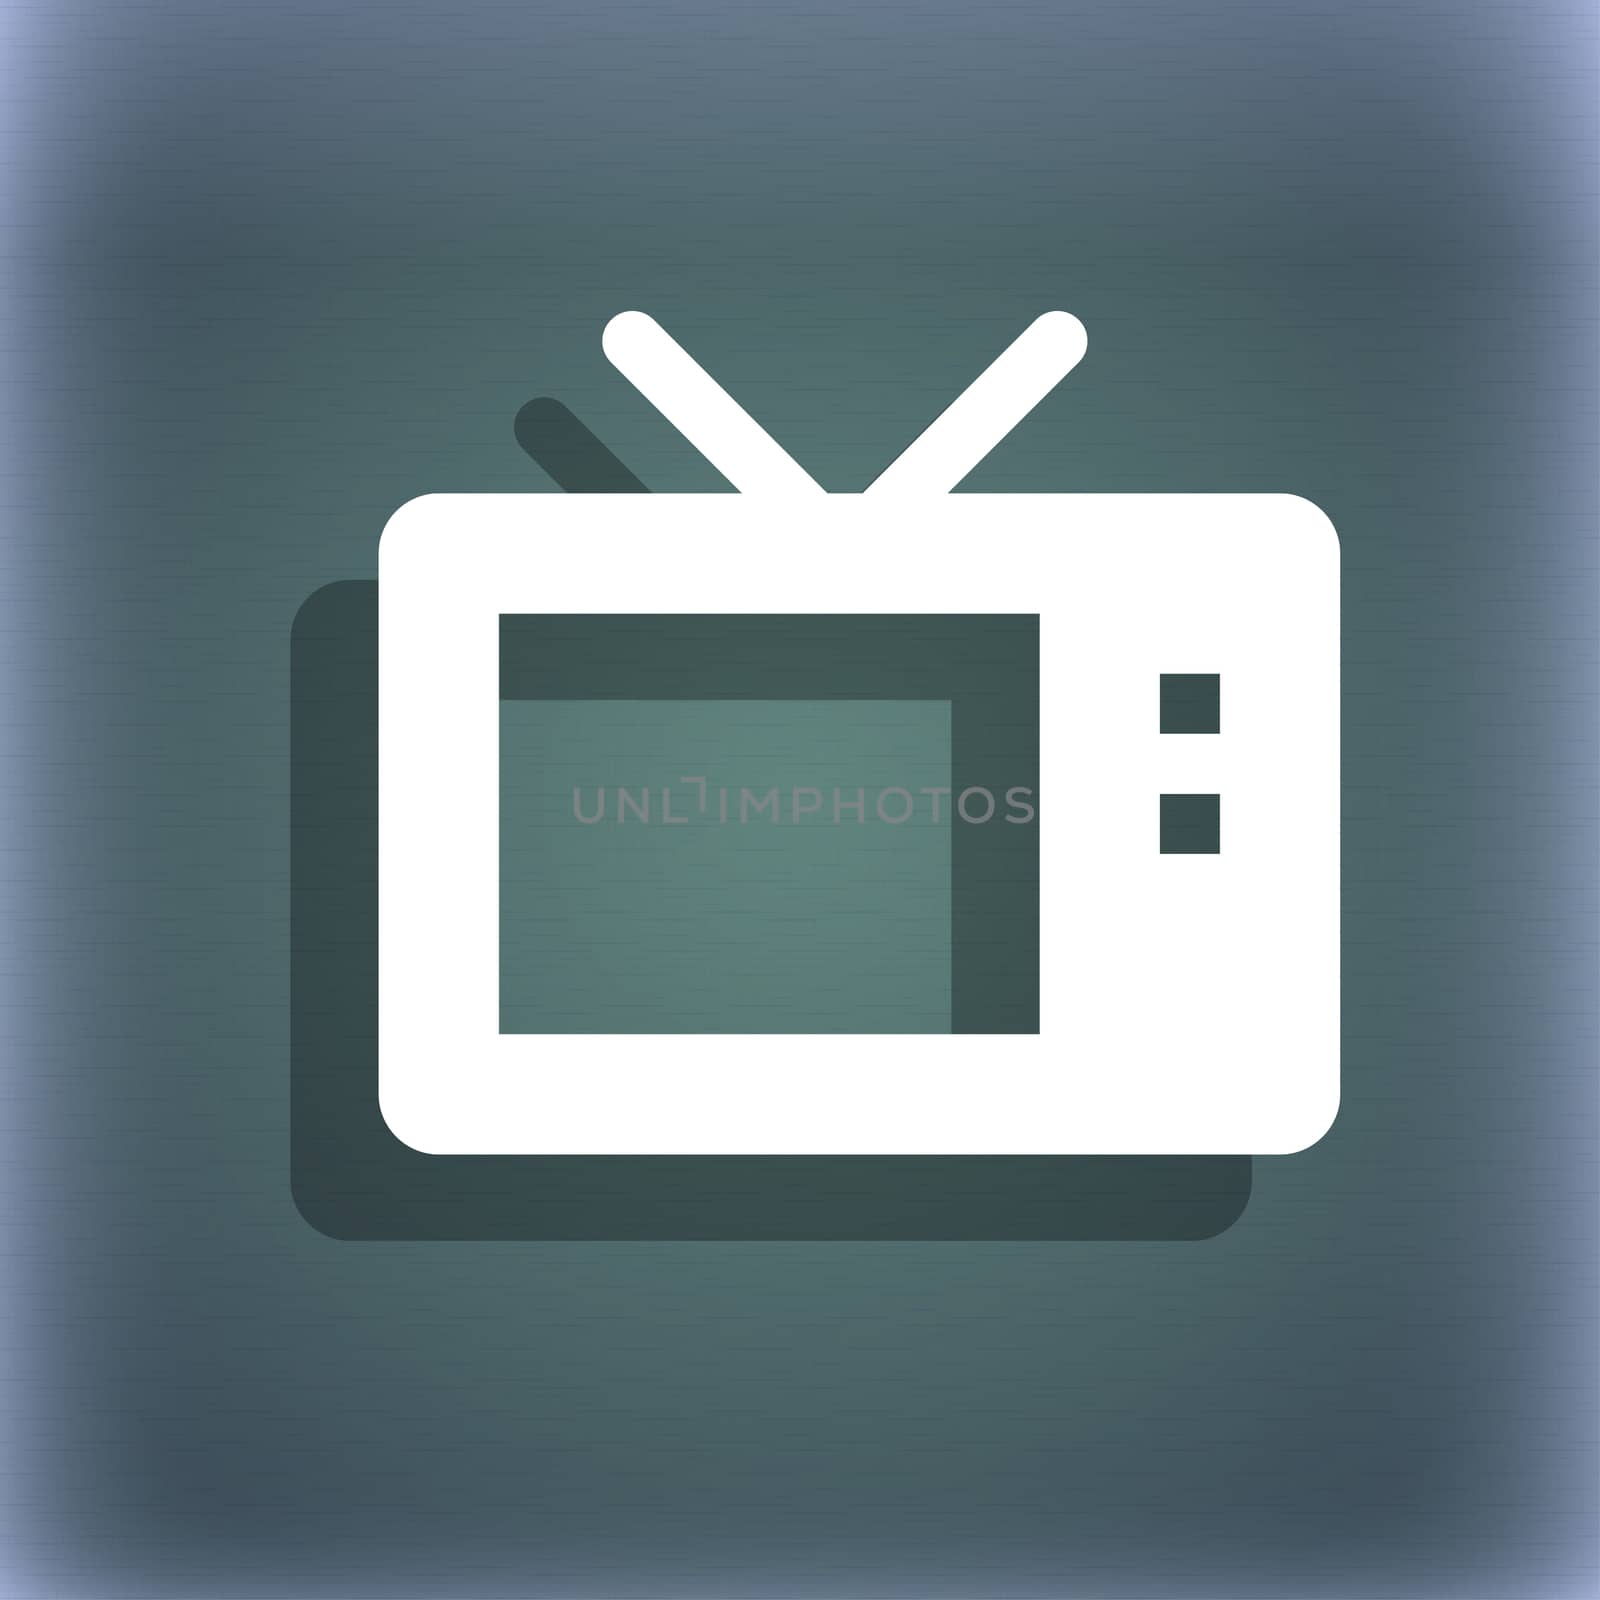 Retro TV mode icon symbol on the blue-green abstract background with shadow and space for your text. illustration